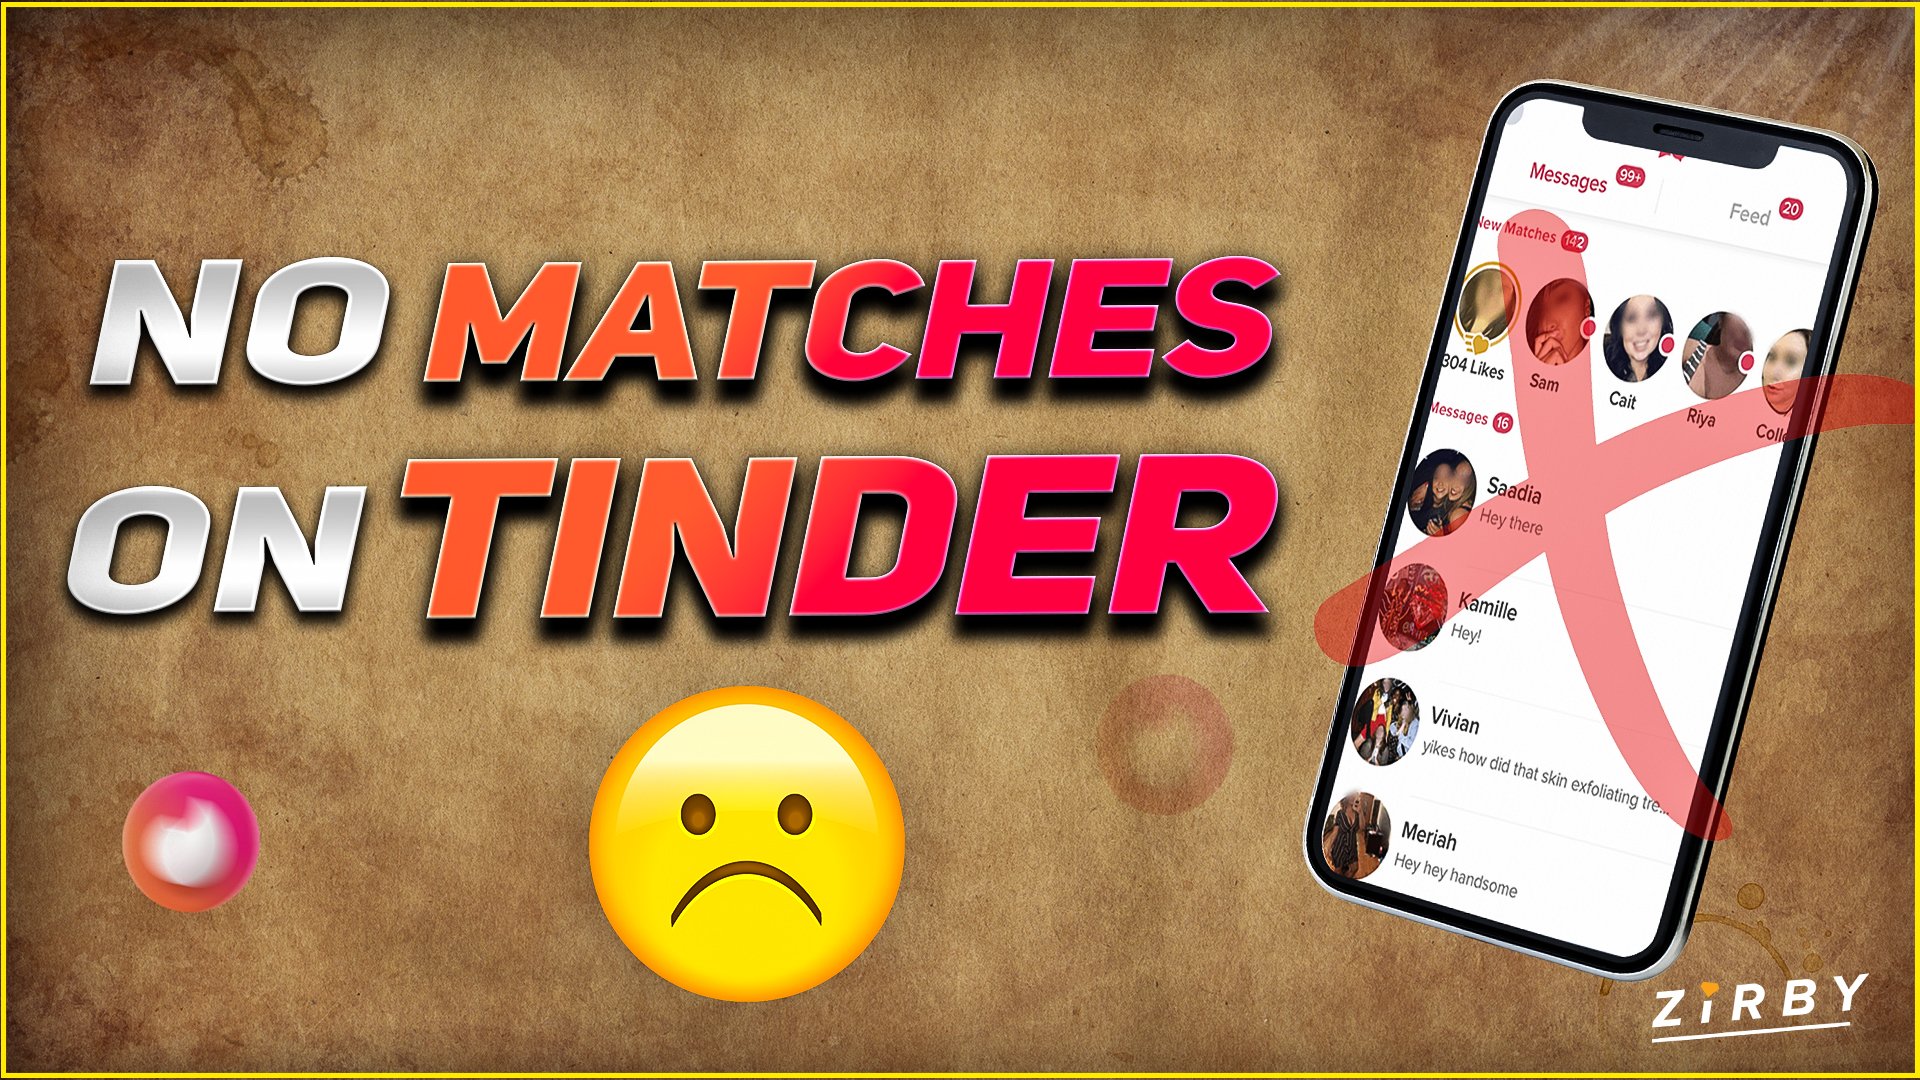 how long does it take to match on tinder